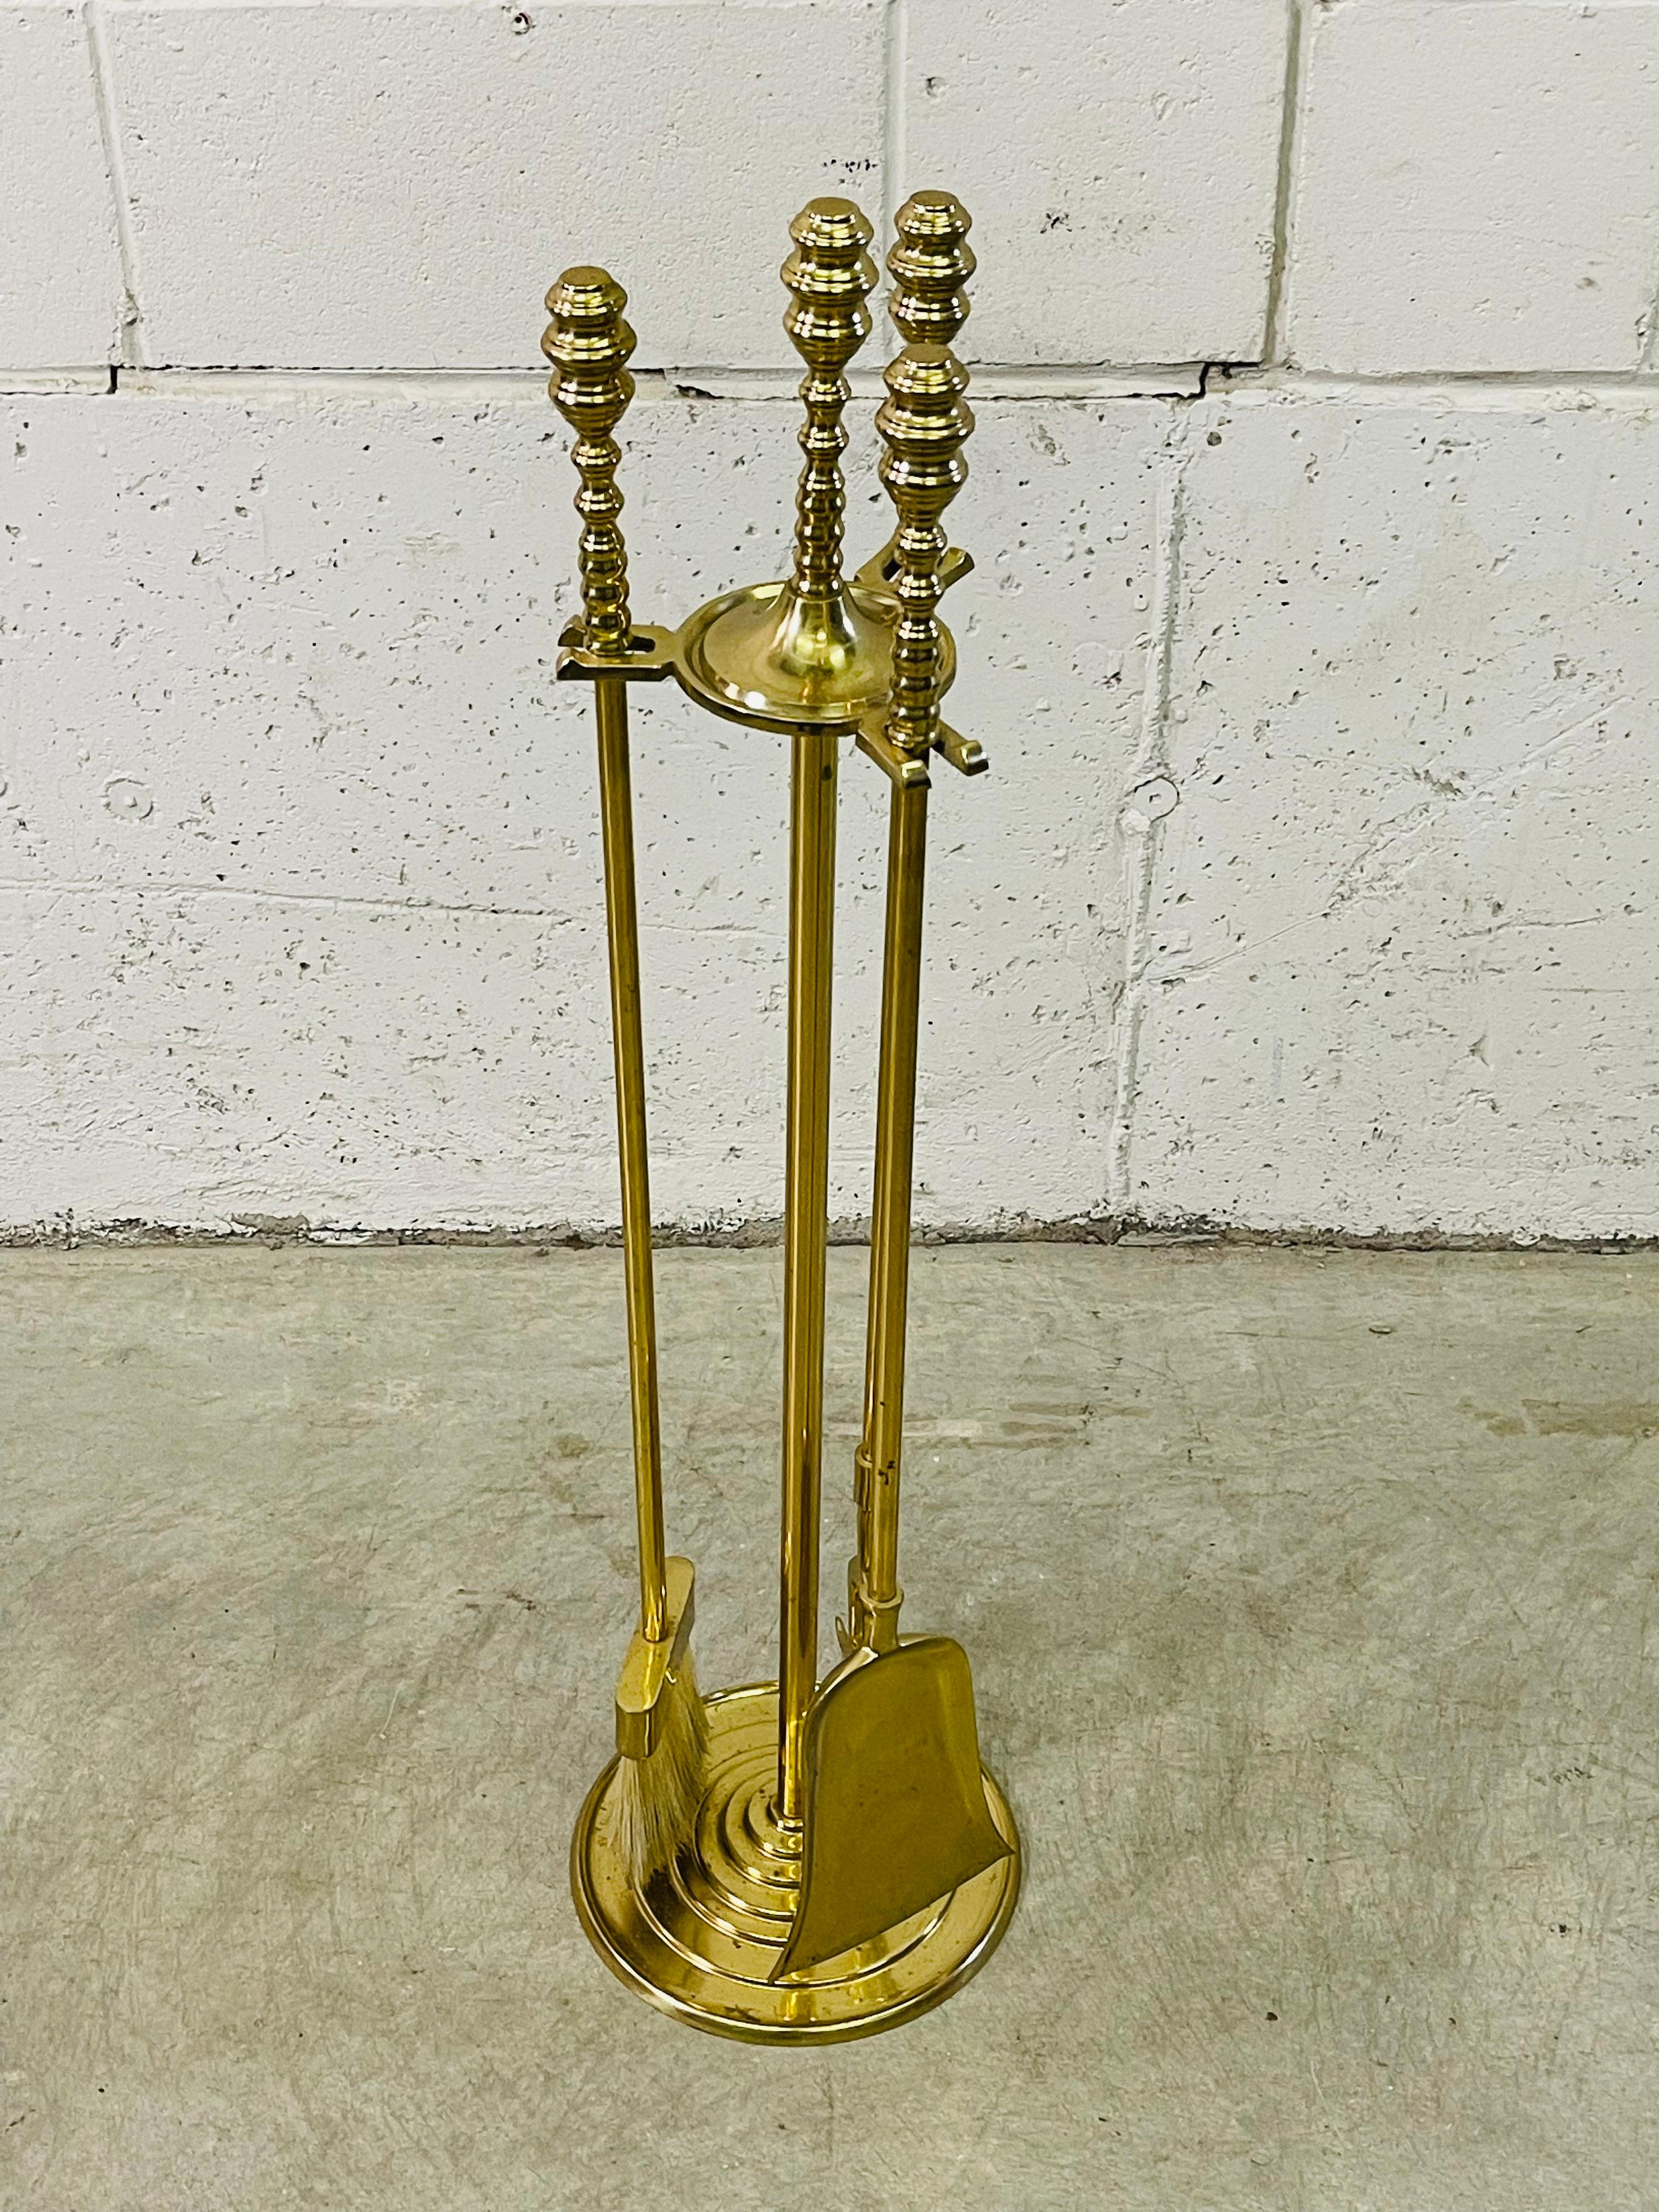 Vintage solid brass beehive style set of four fireplace tools. The handles have the beehive styling and it comes with three tools and the holder. The set is solid and sturdy.